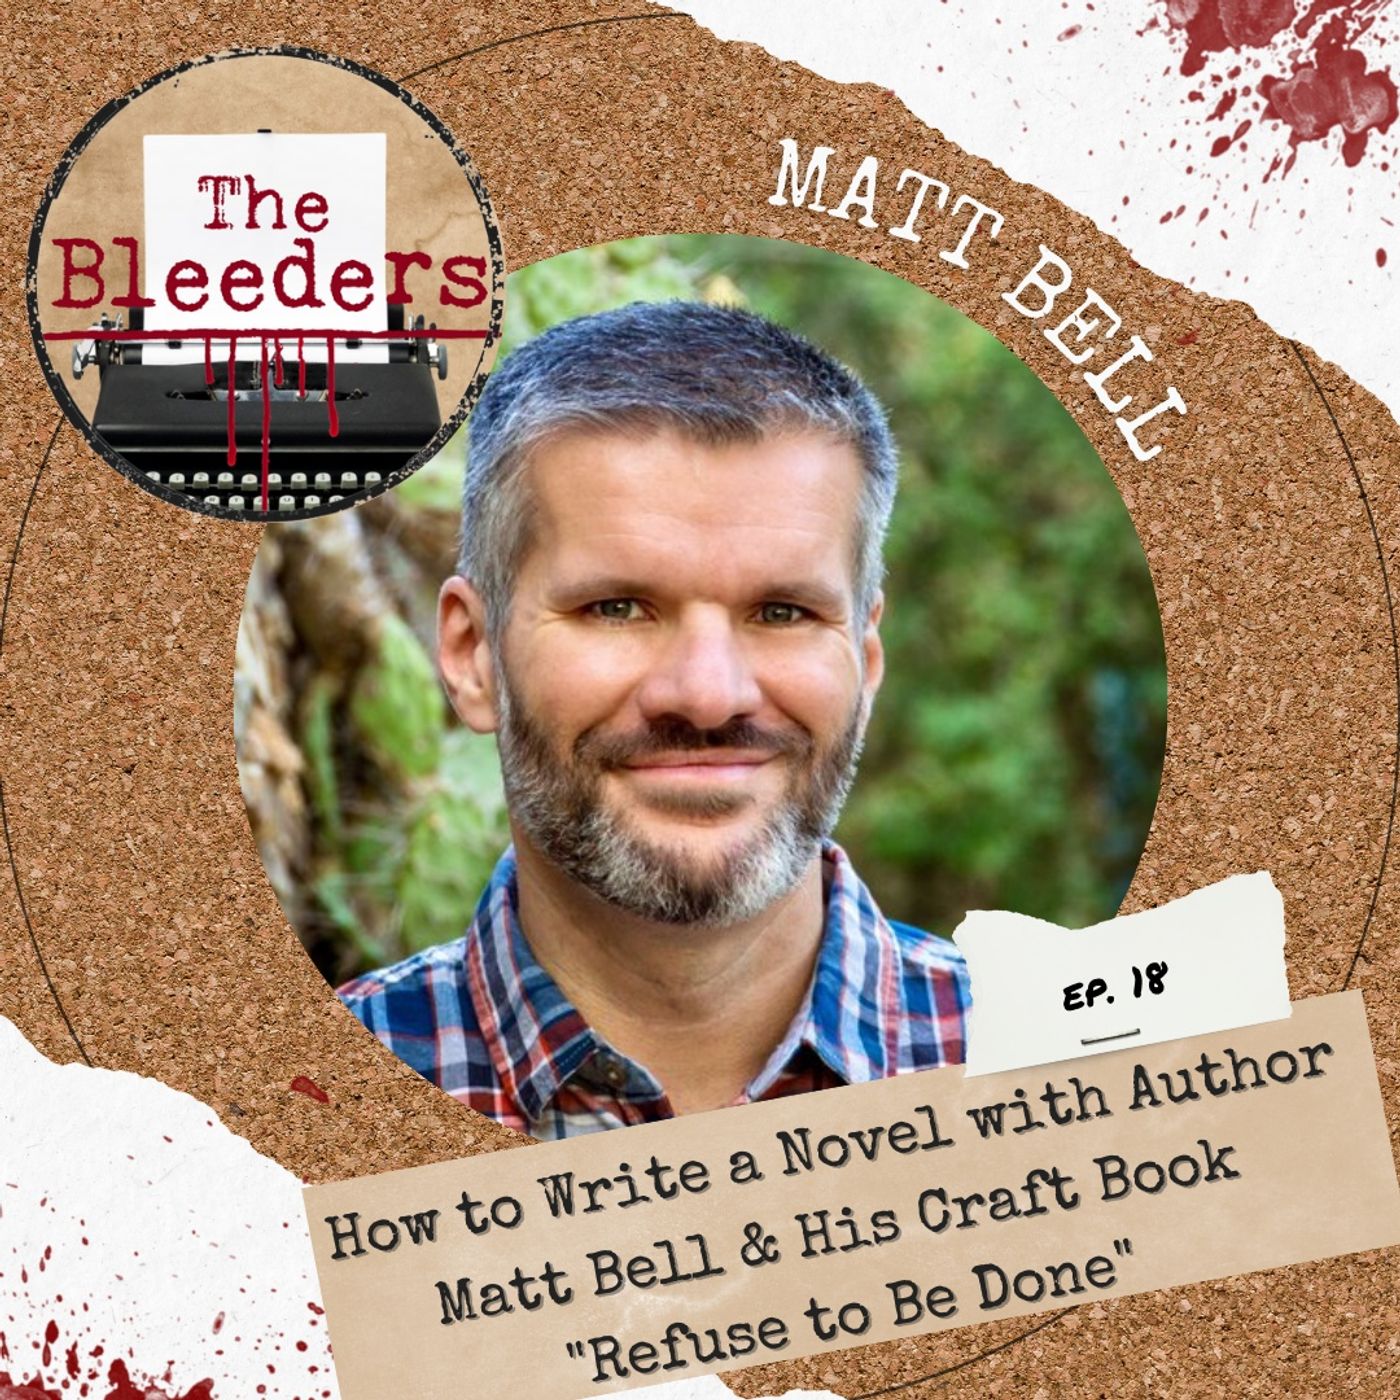 How to Write a Novel with Author Matt Bell & His Craft Book 